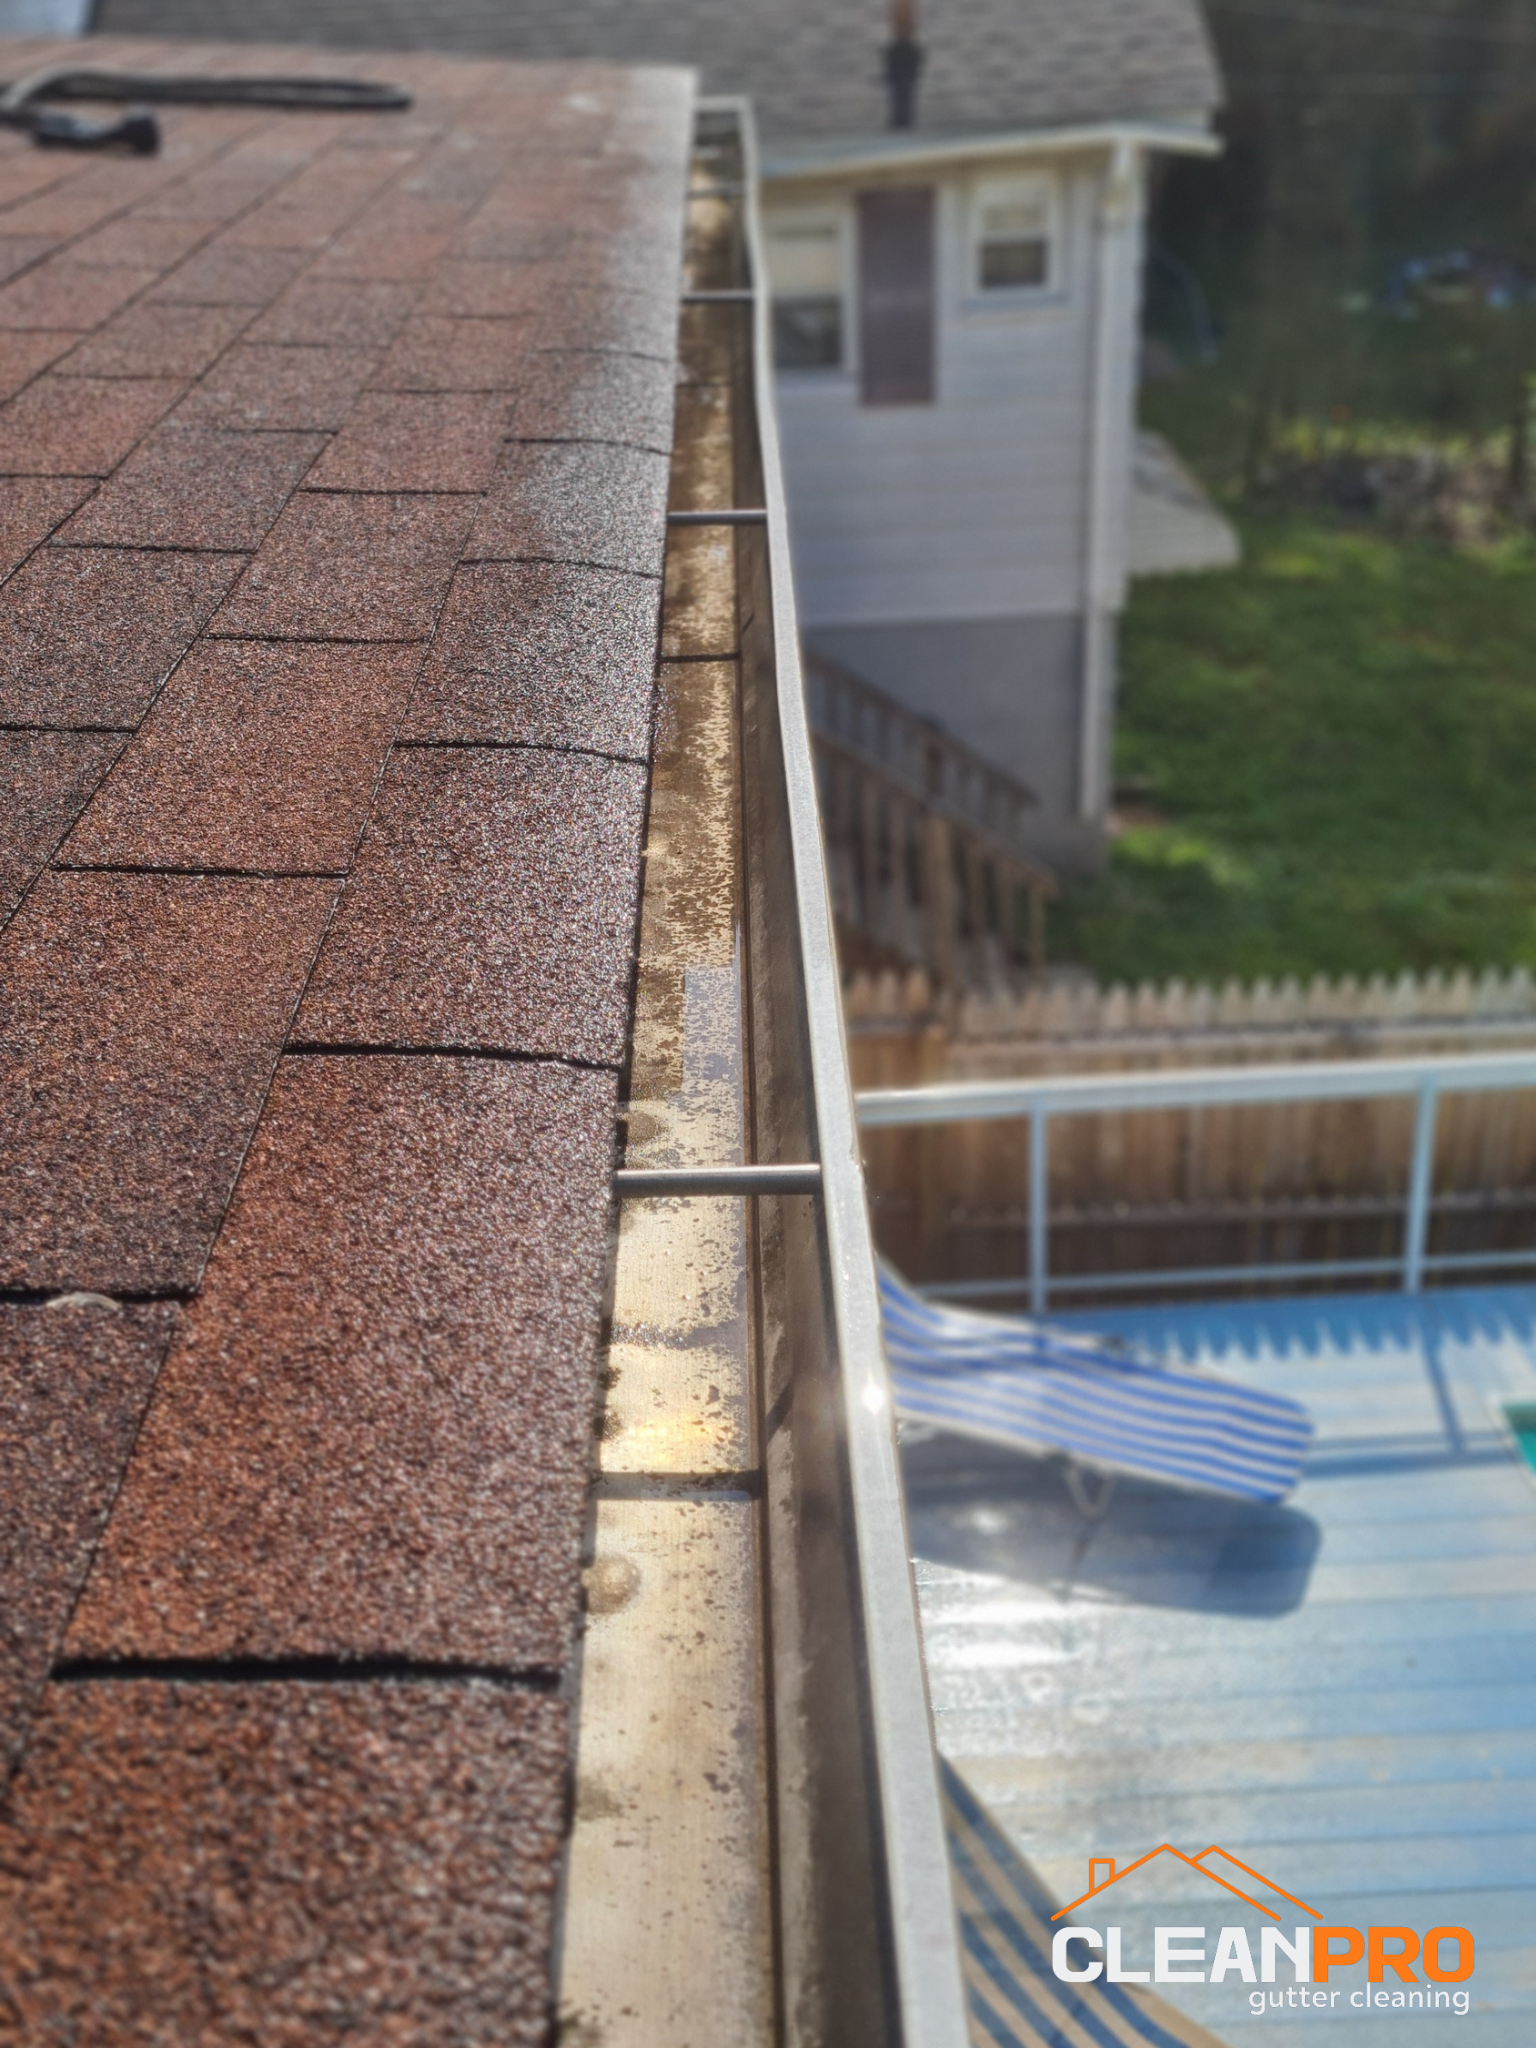 Quality Gutter Cleaning in Syracuse NY